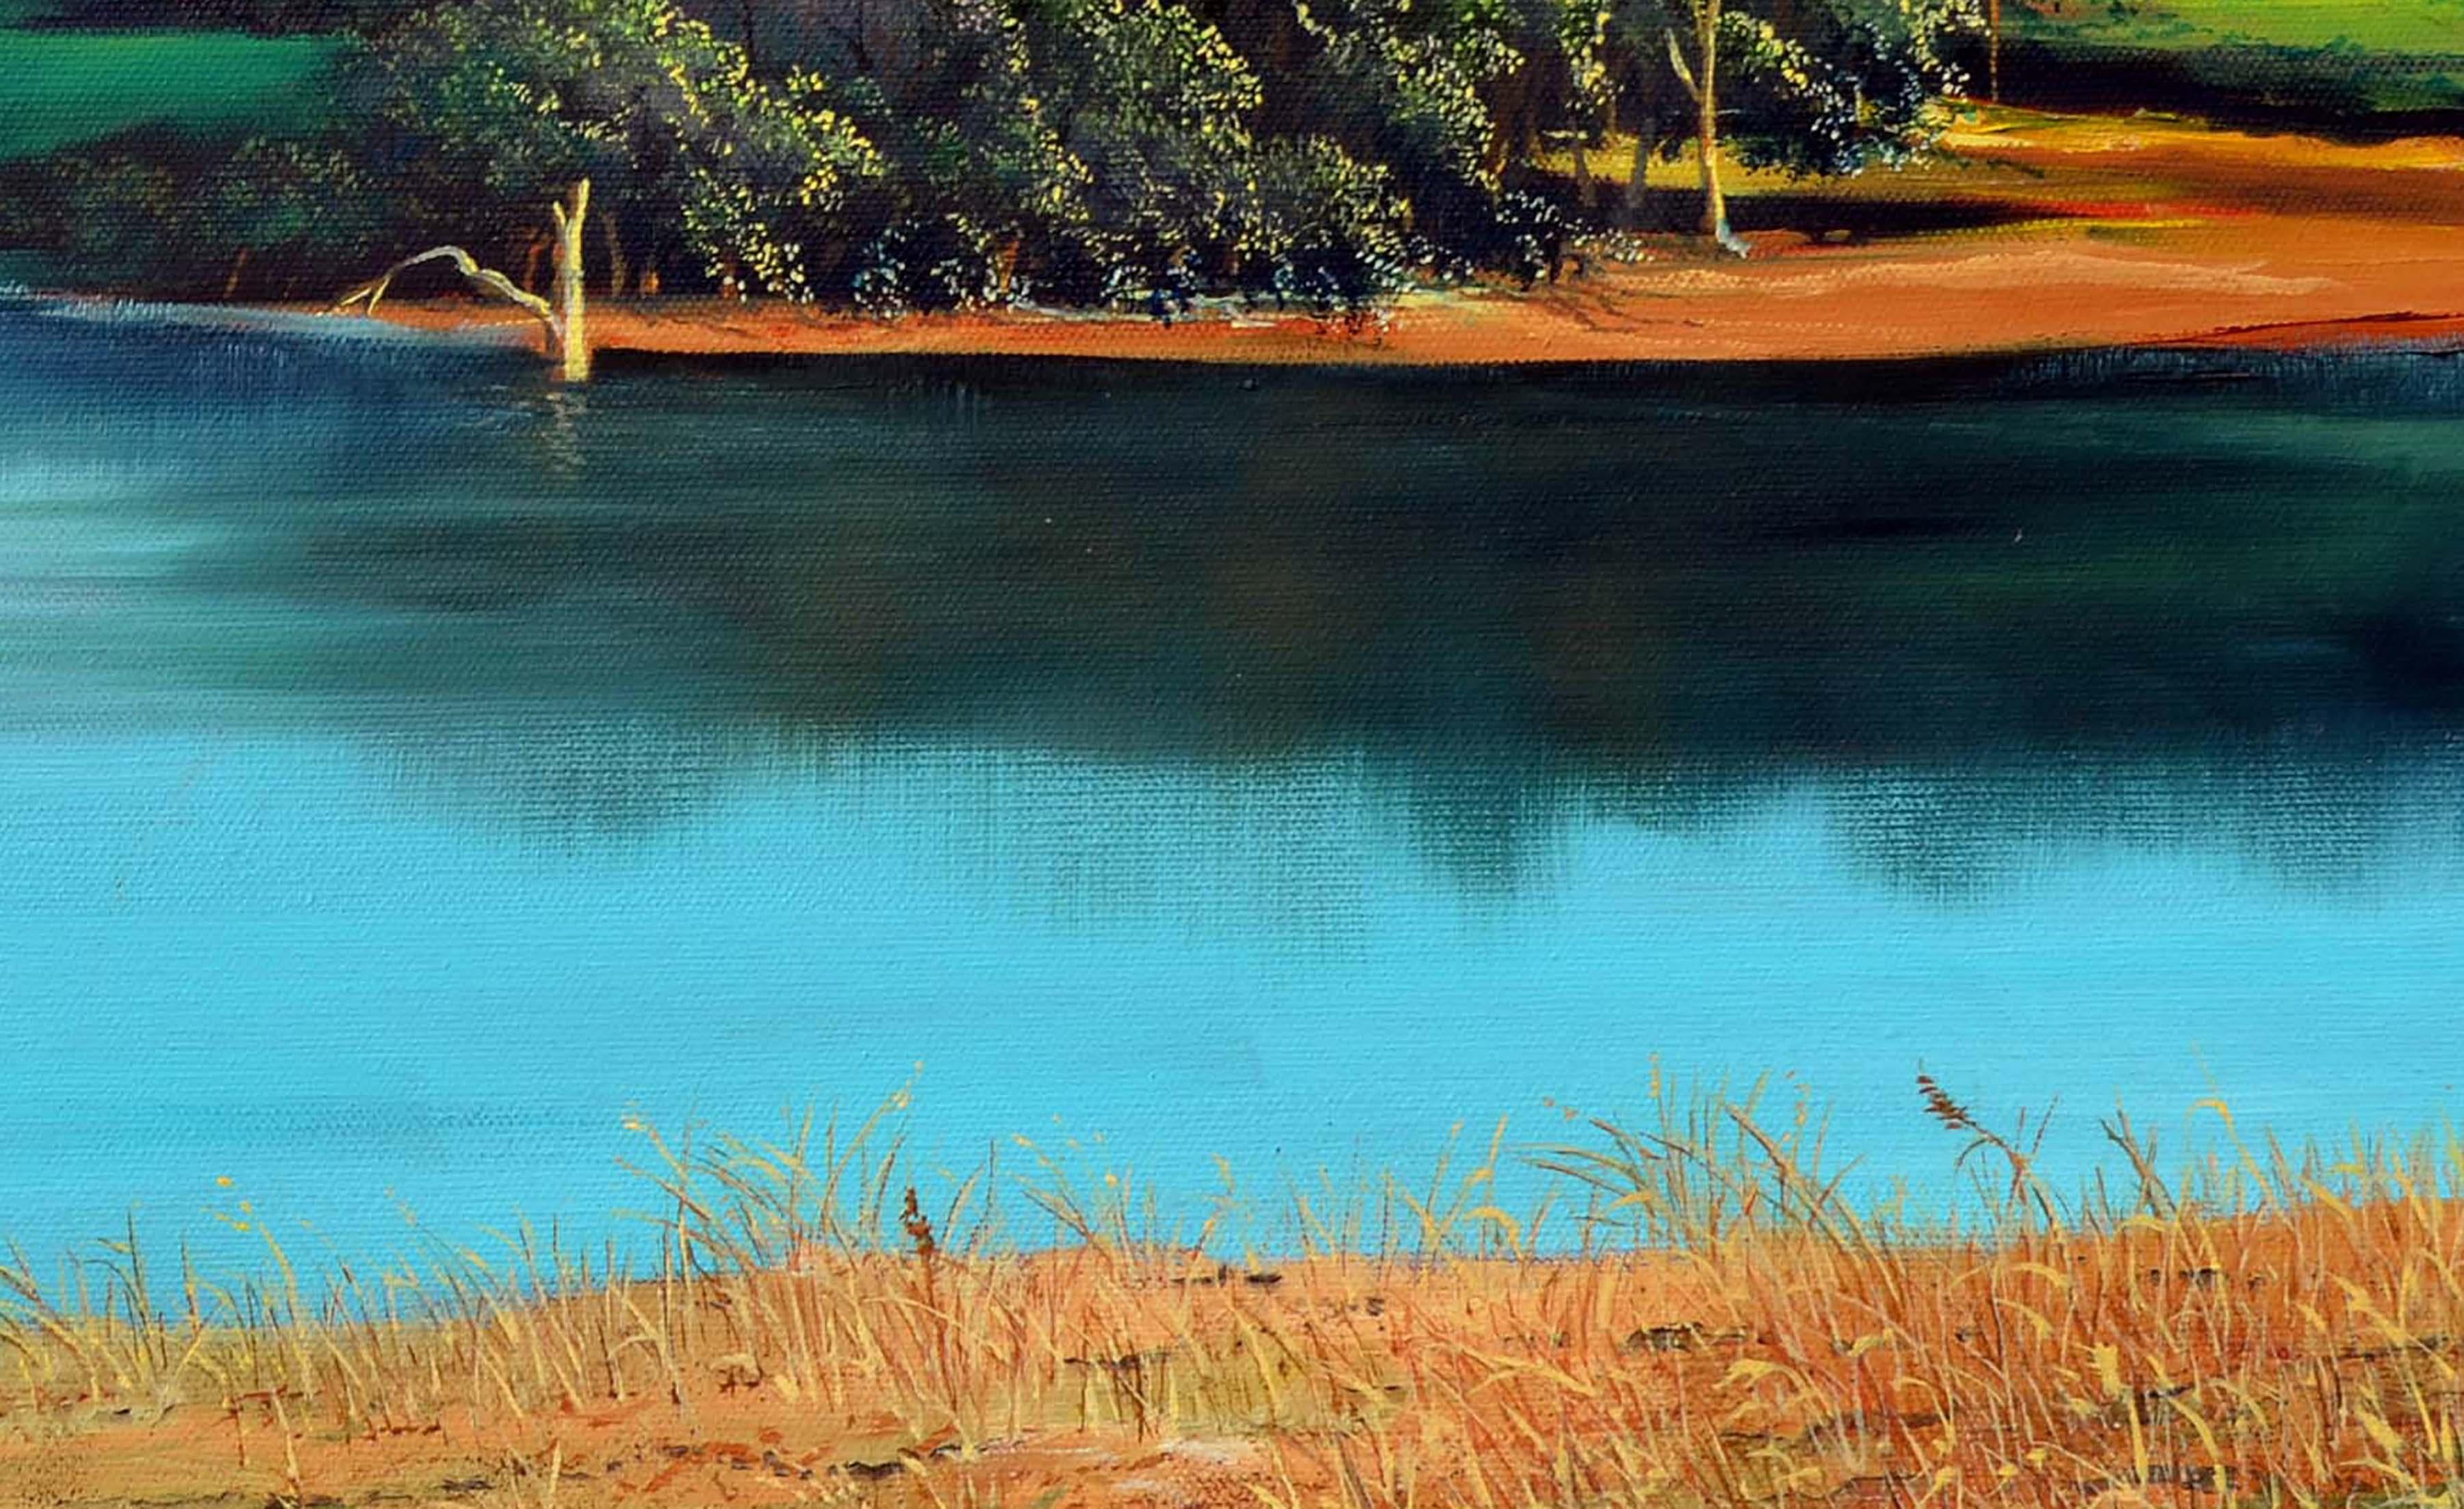 Crisp realist landscape of two ducks on the lakeside surrounded by rolling hills near Mt Tamalpais by Luke Stamos (American, b. 1938). Unsigned; one of 3 we purchased (one of which is signed) in Los Gatos California from the buyer who acquired them